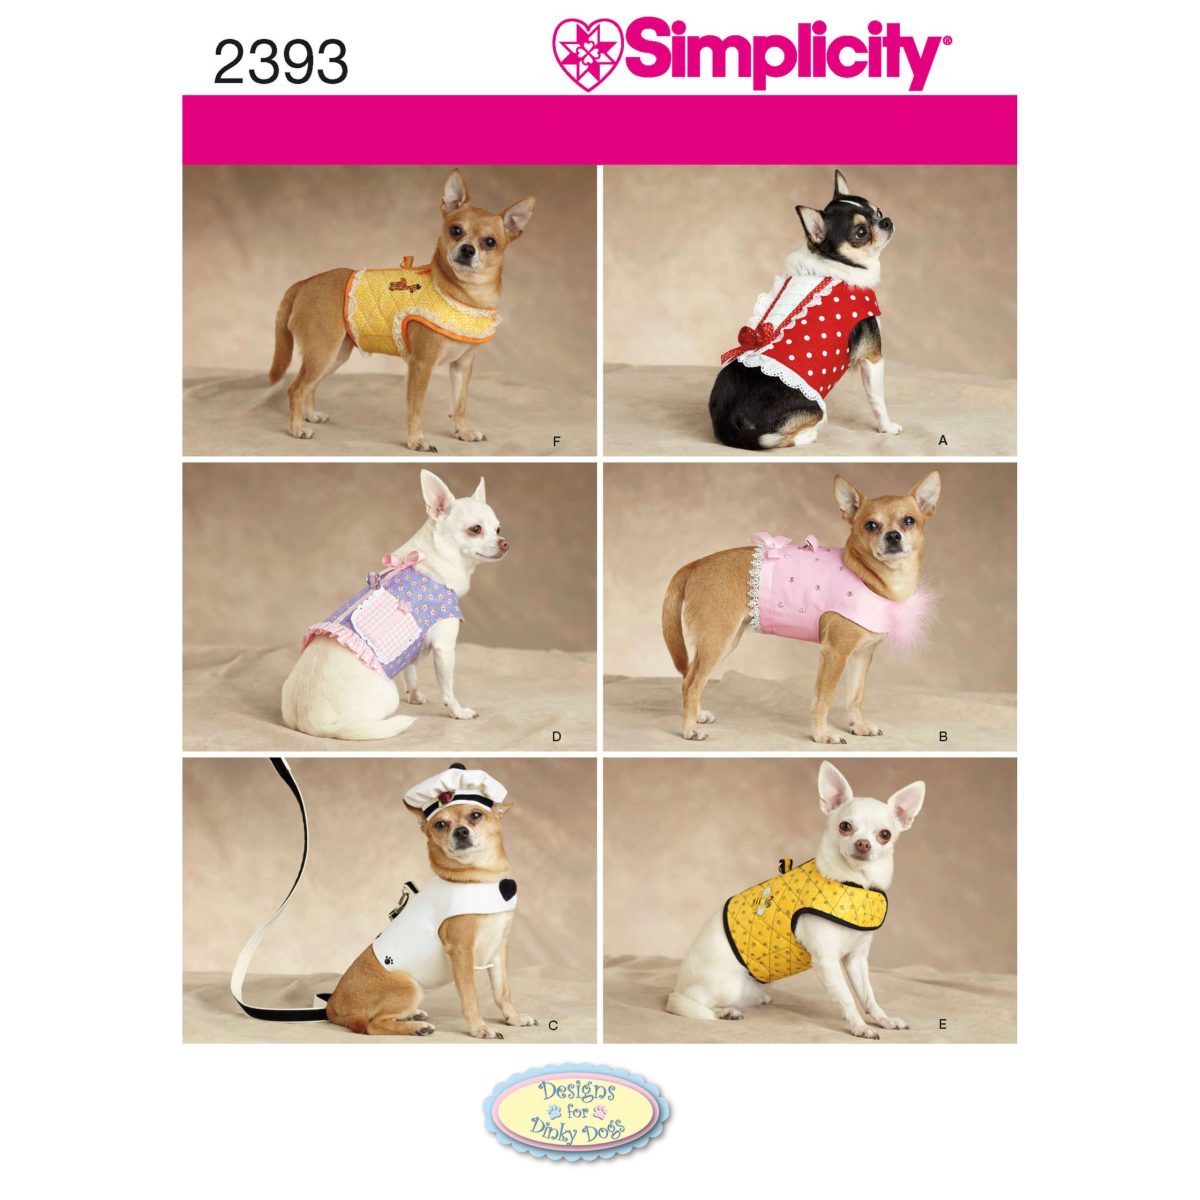 Simplicity Sewing Pattern 2393 Dog Clothes